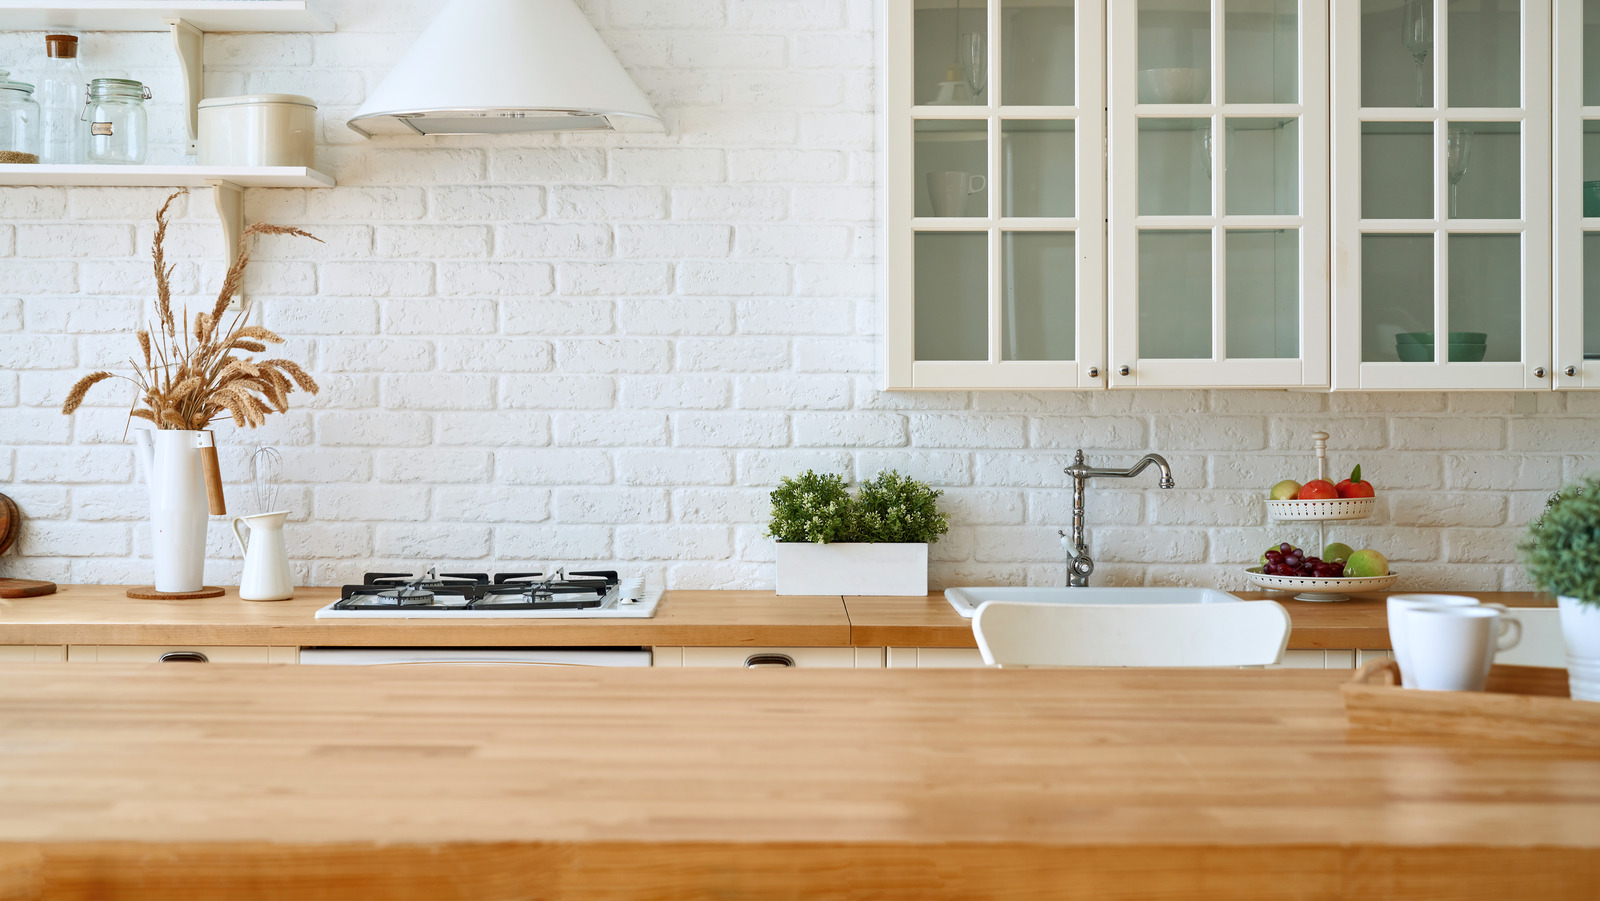 Is There A Best Type of Wood For Countertops? - Hardwood Lumber Company